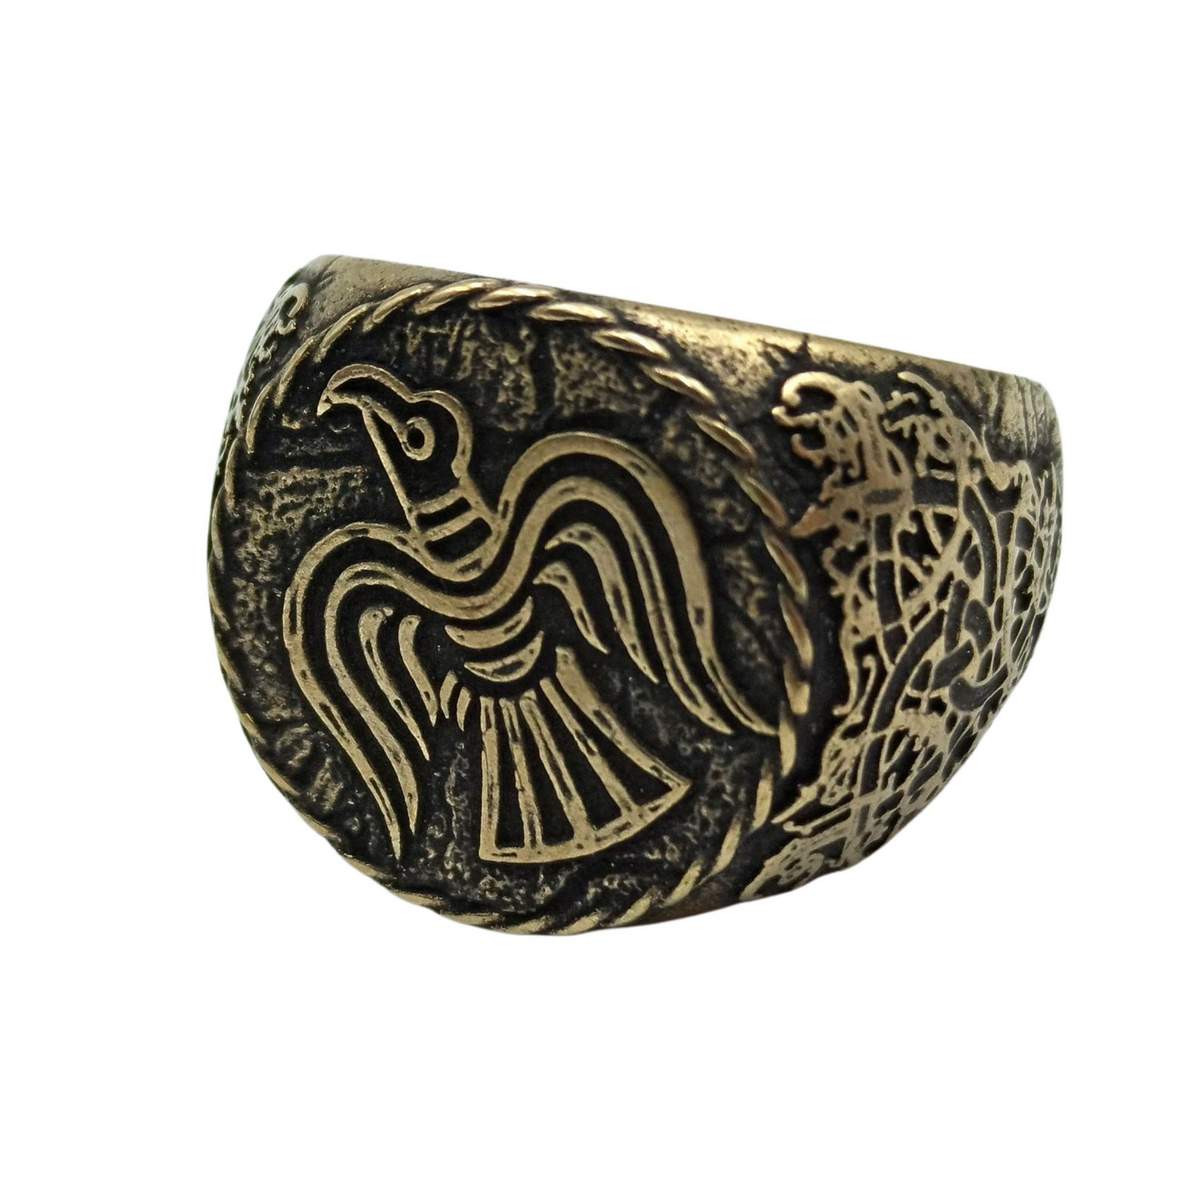 Raven banner bronze ring 6 US Bronze with patina 